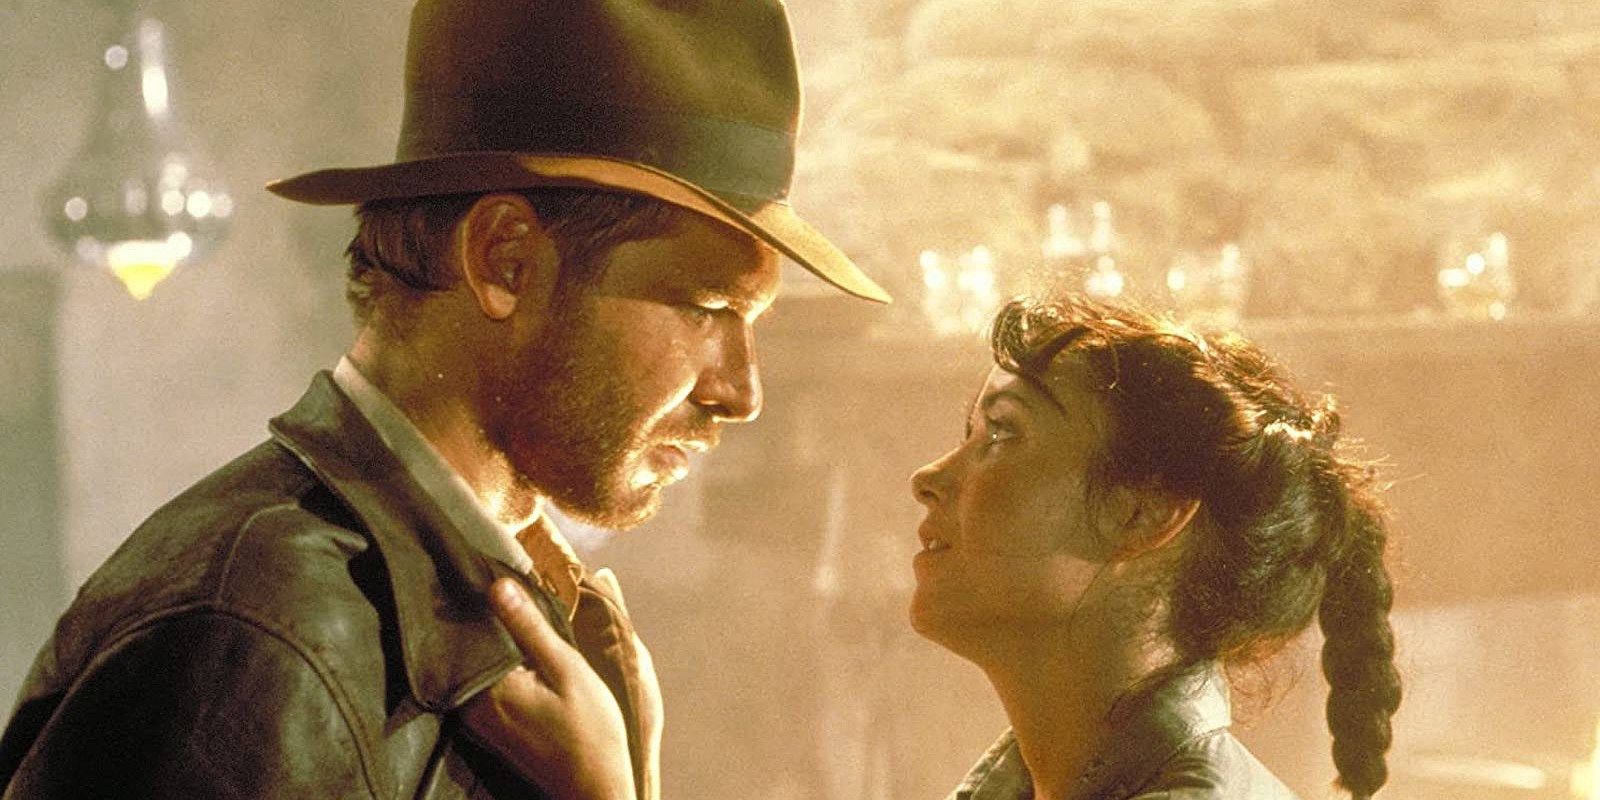 Indy and Marion reunite in Raiders of the Lost Ark.